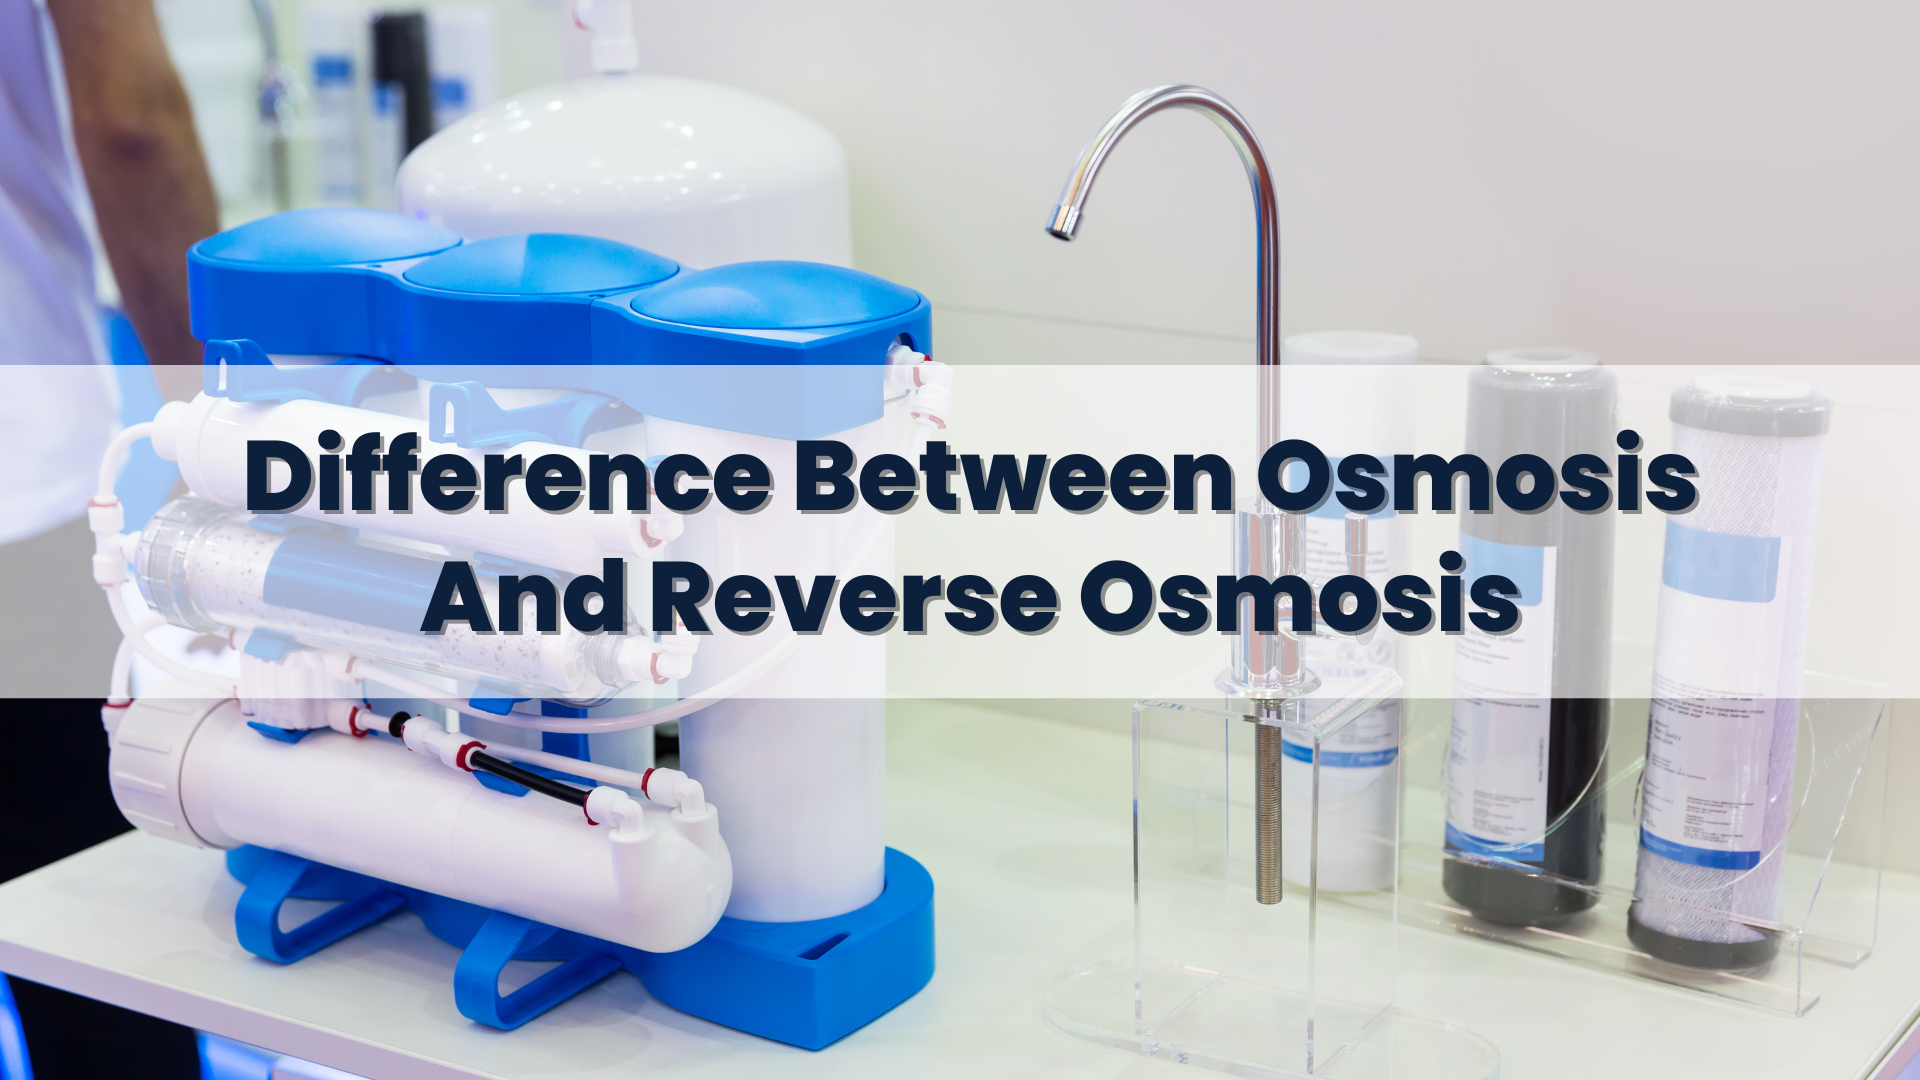 Difference Between Osmosis And Reverse Osmosis